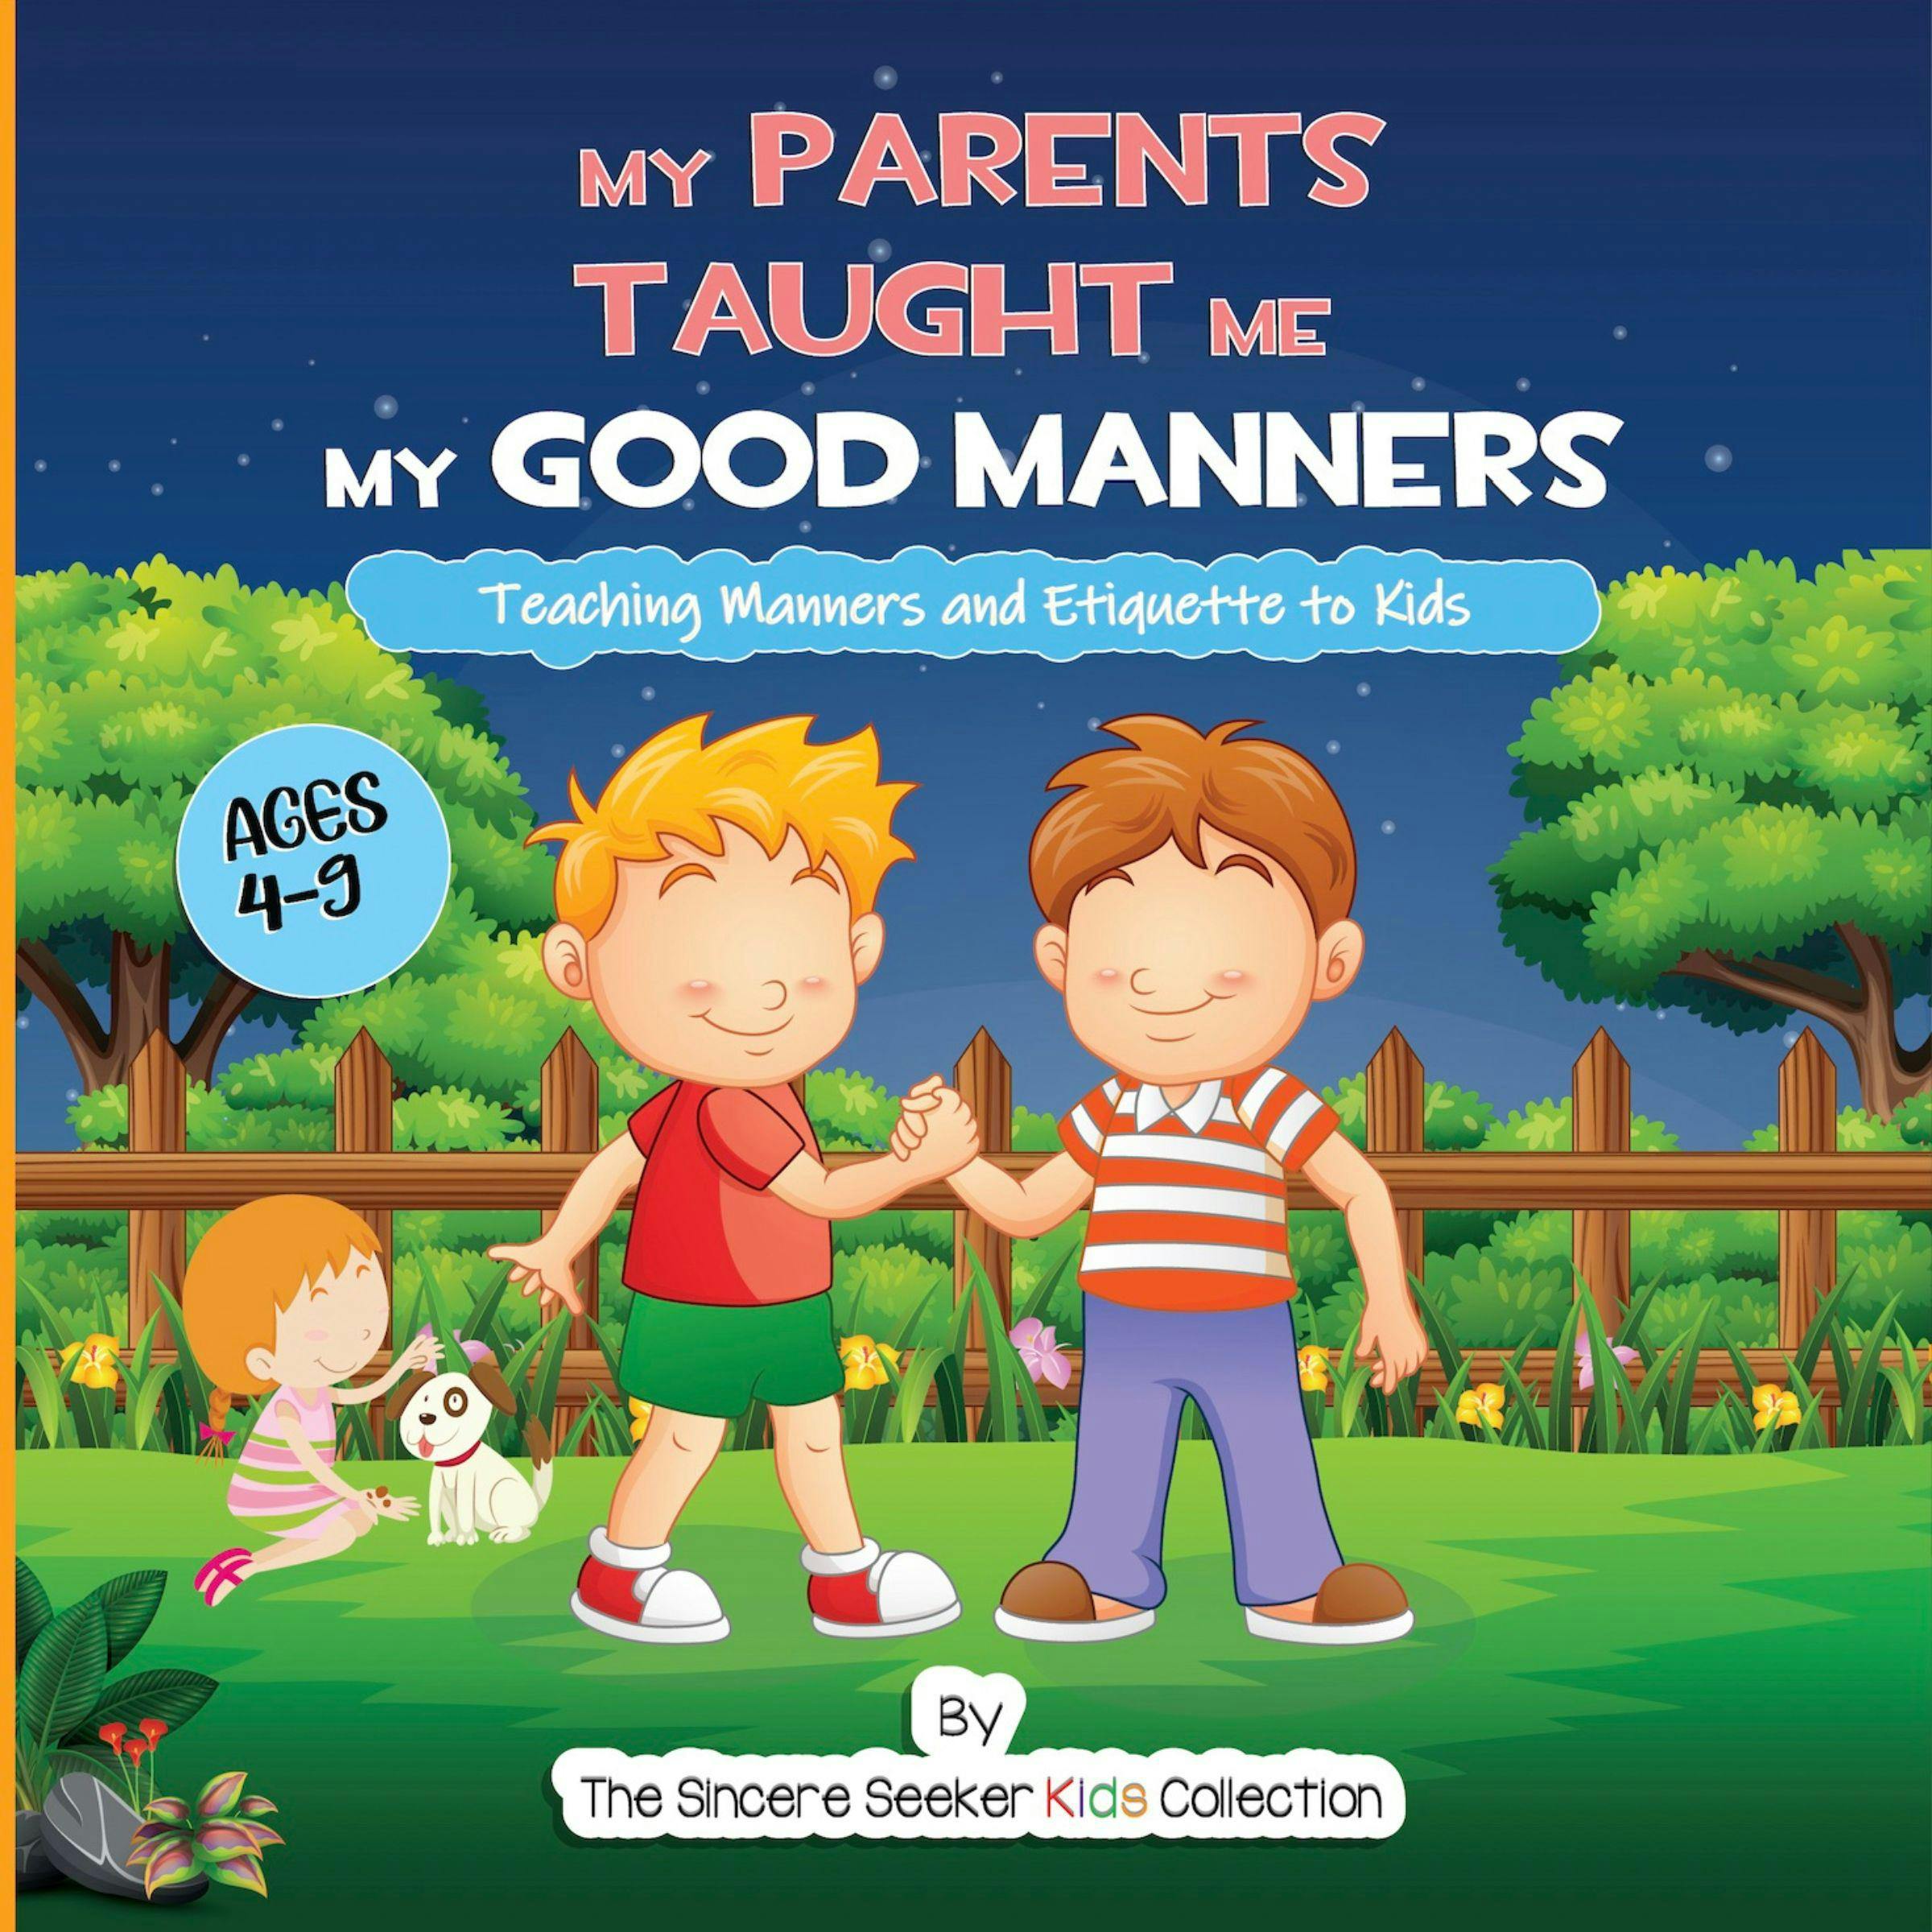 good manners for children posters